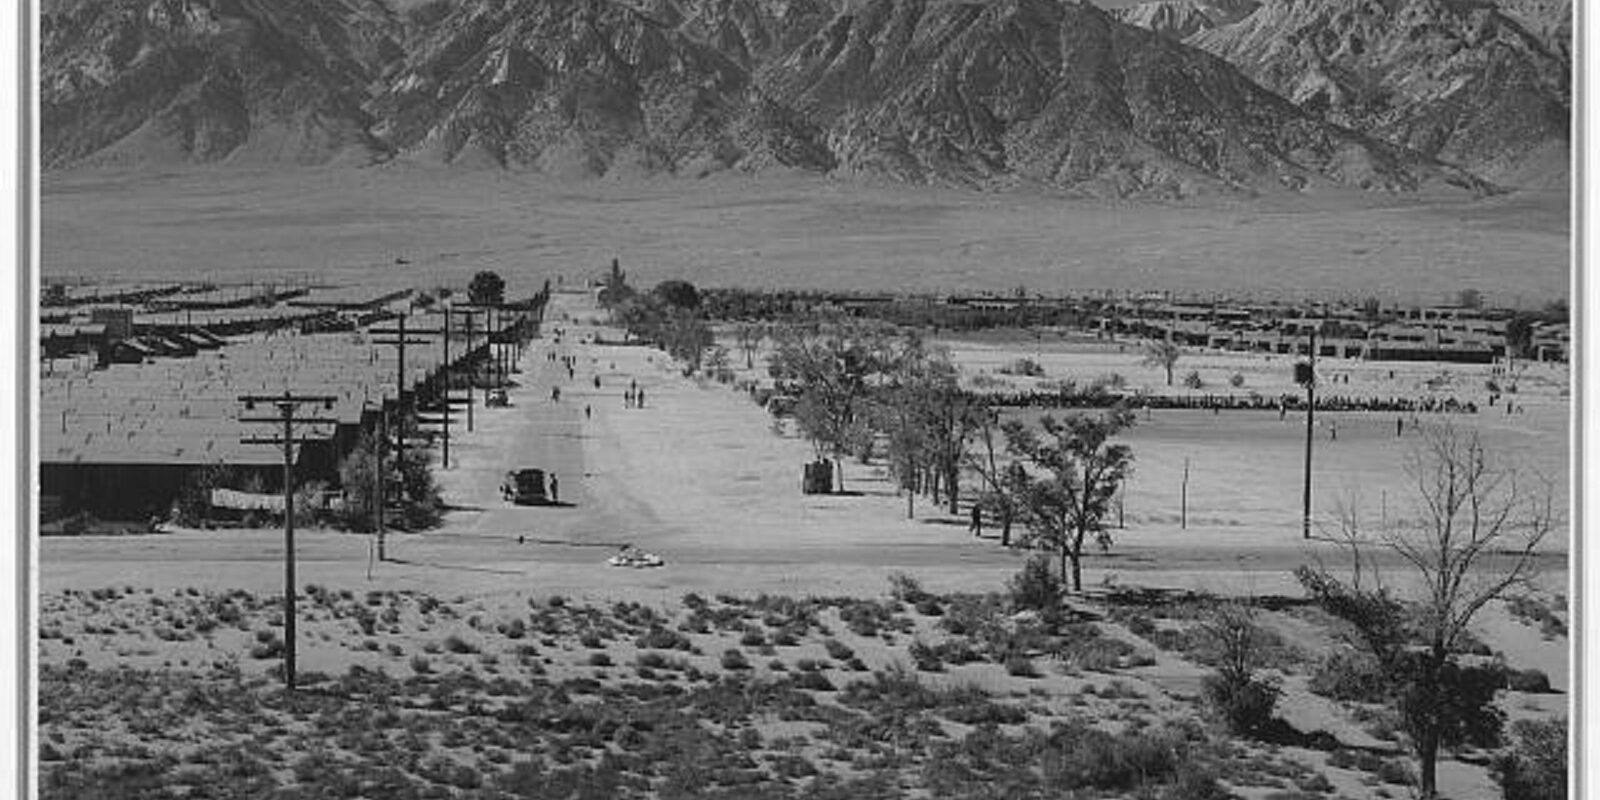 Manzanar Relocation Center from tower (1943)